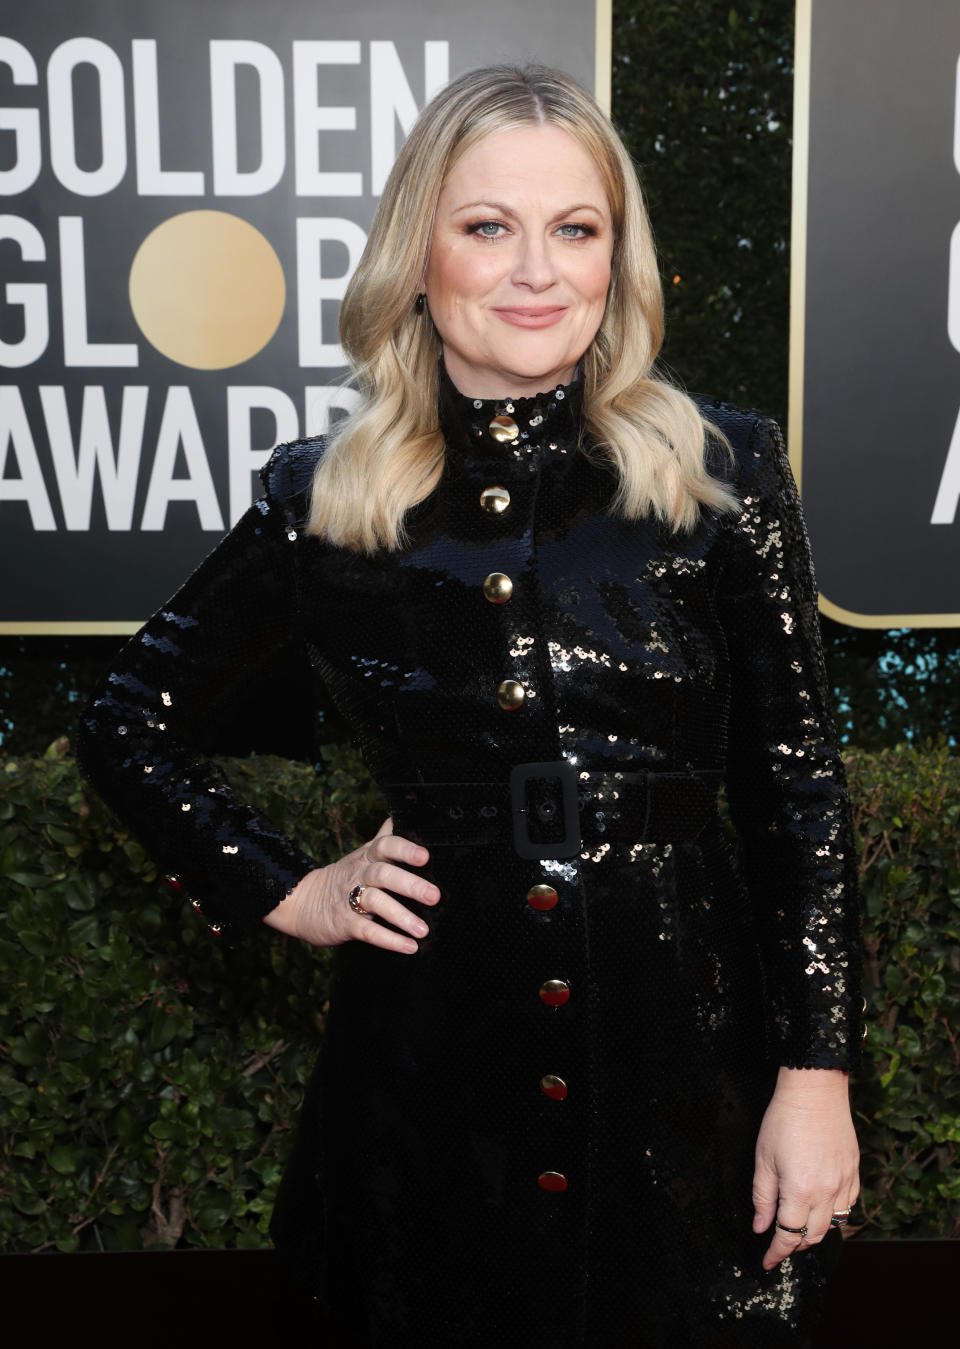 Amy Poehler on the red carpet at the Golden Globes 2021